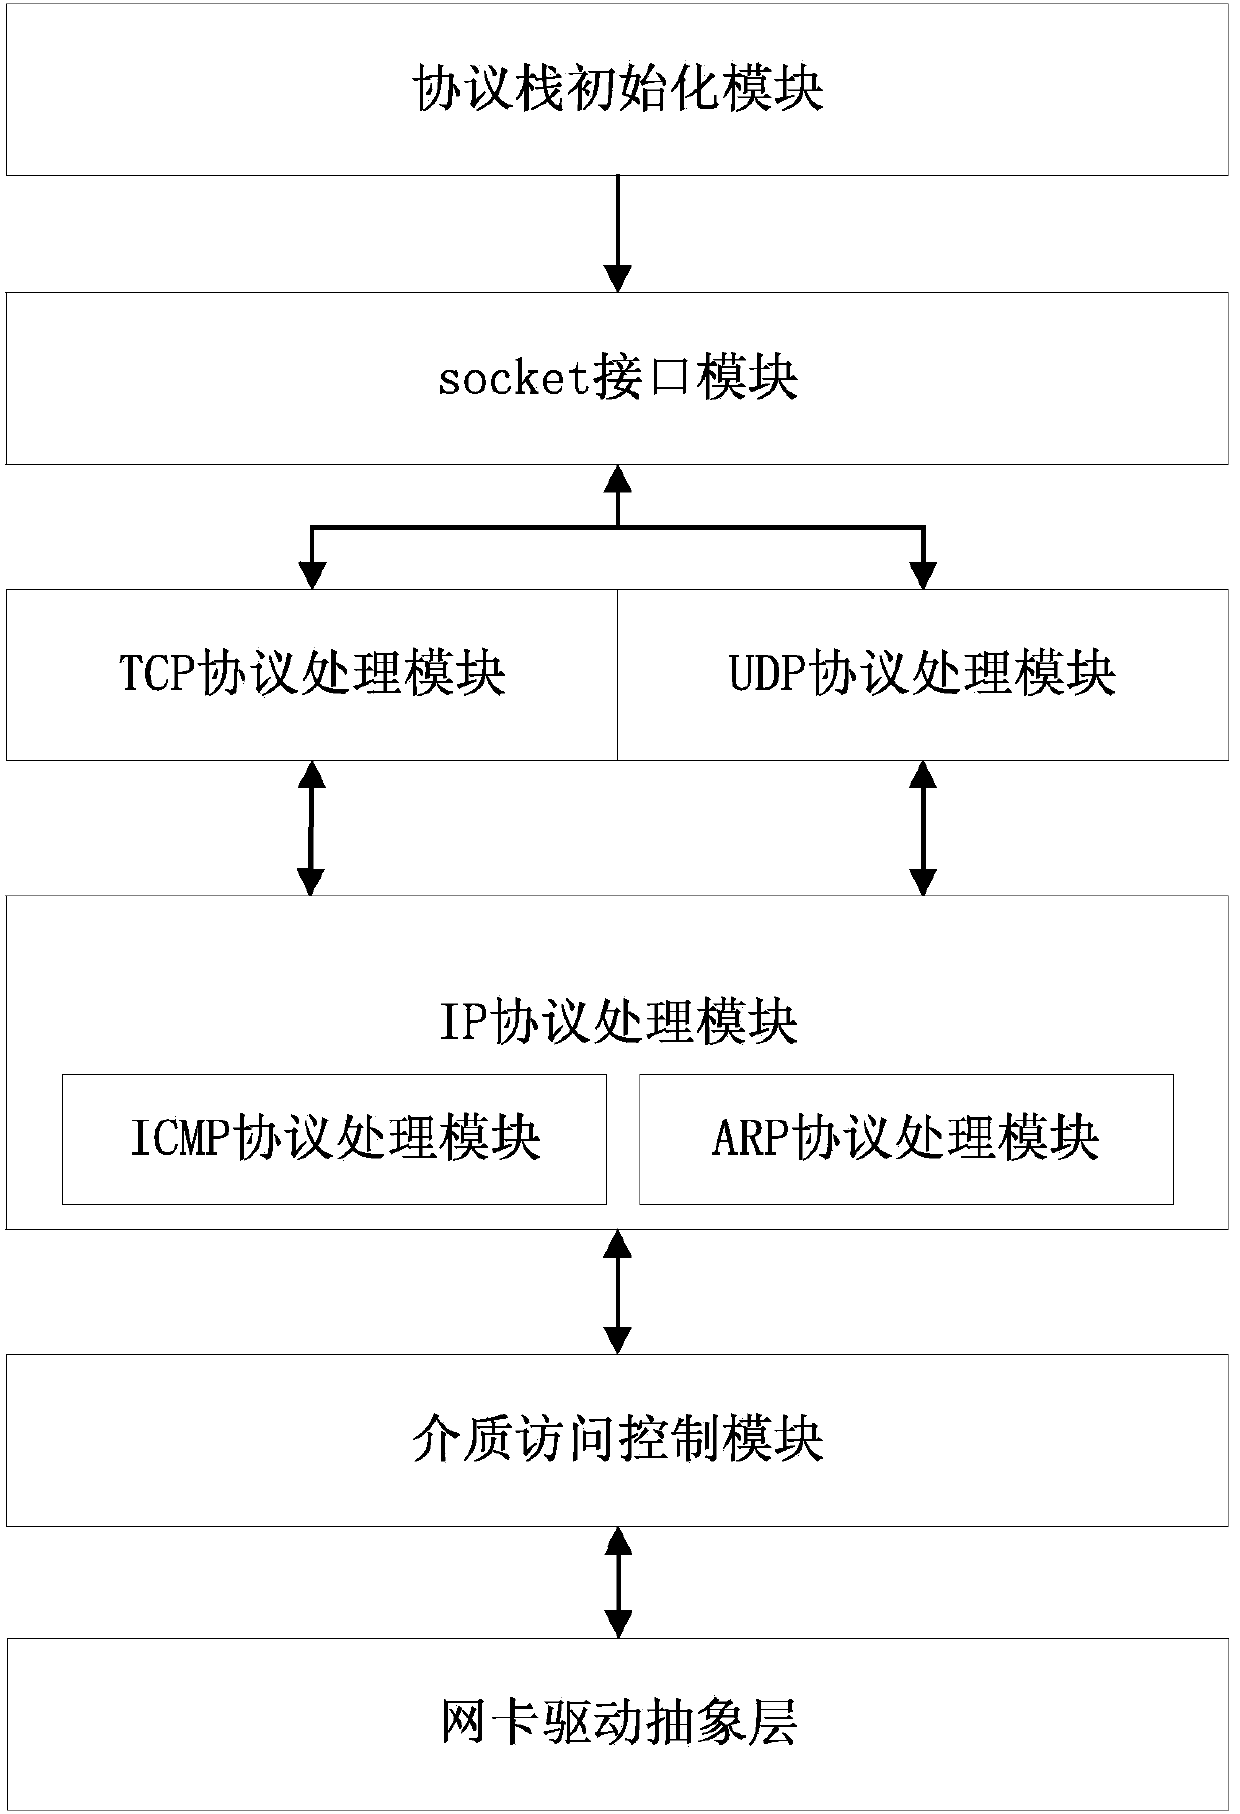 Achieving method of light-weight real-time TCP/IP protocol stack